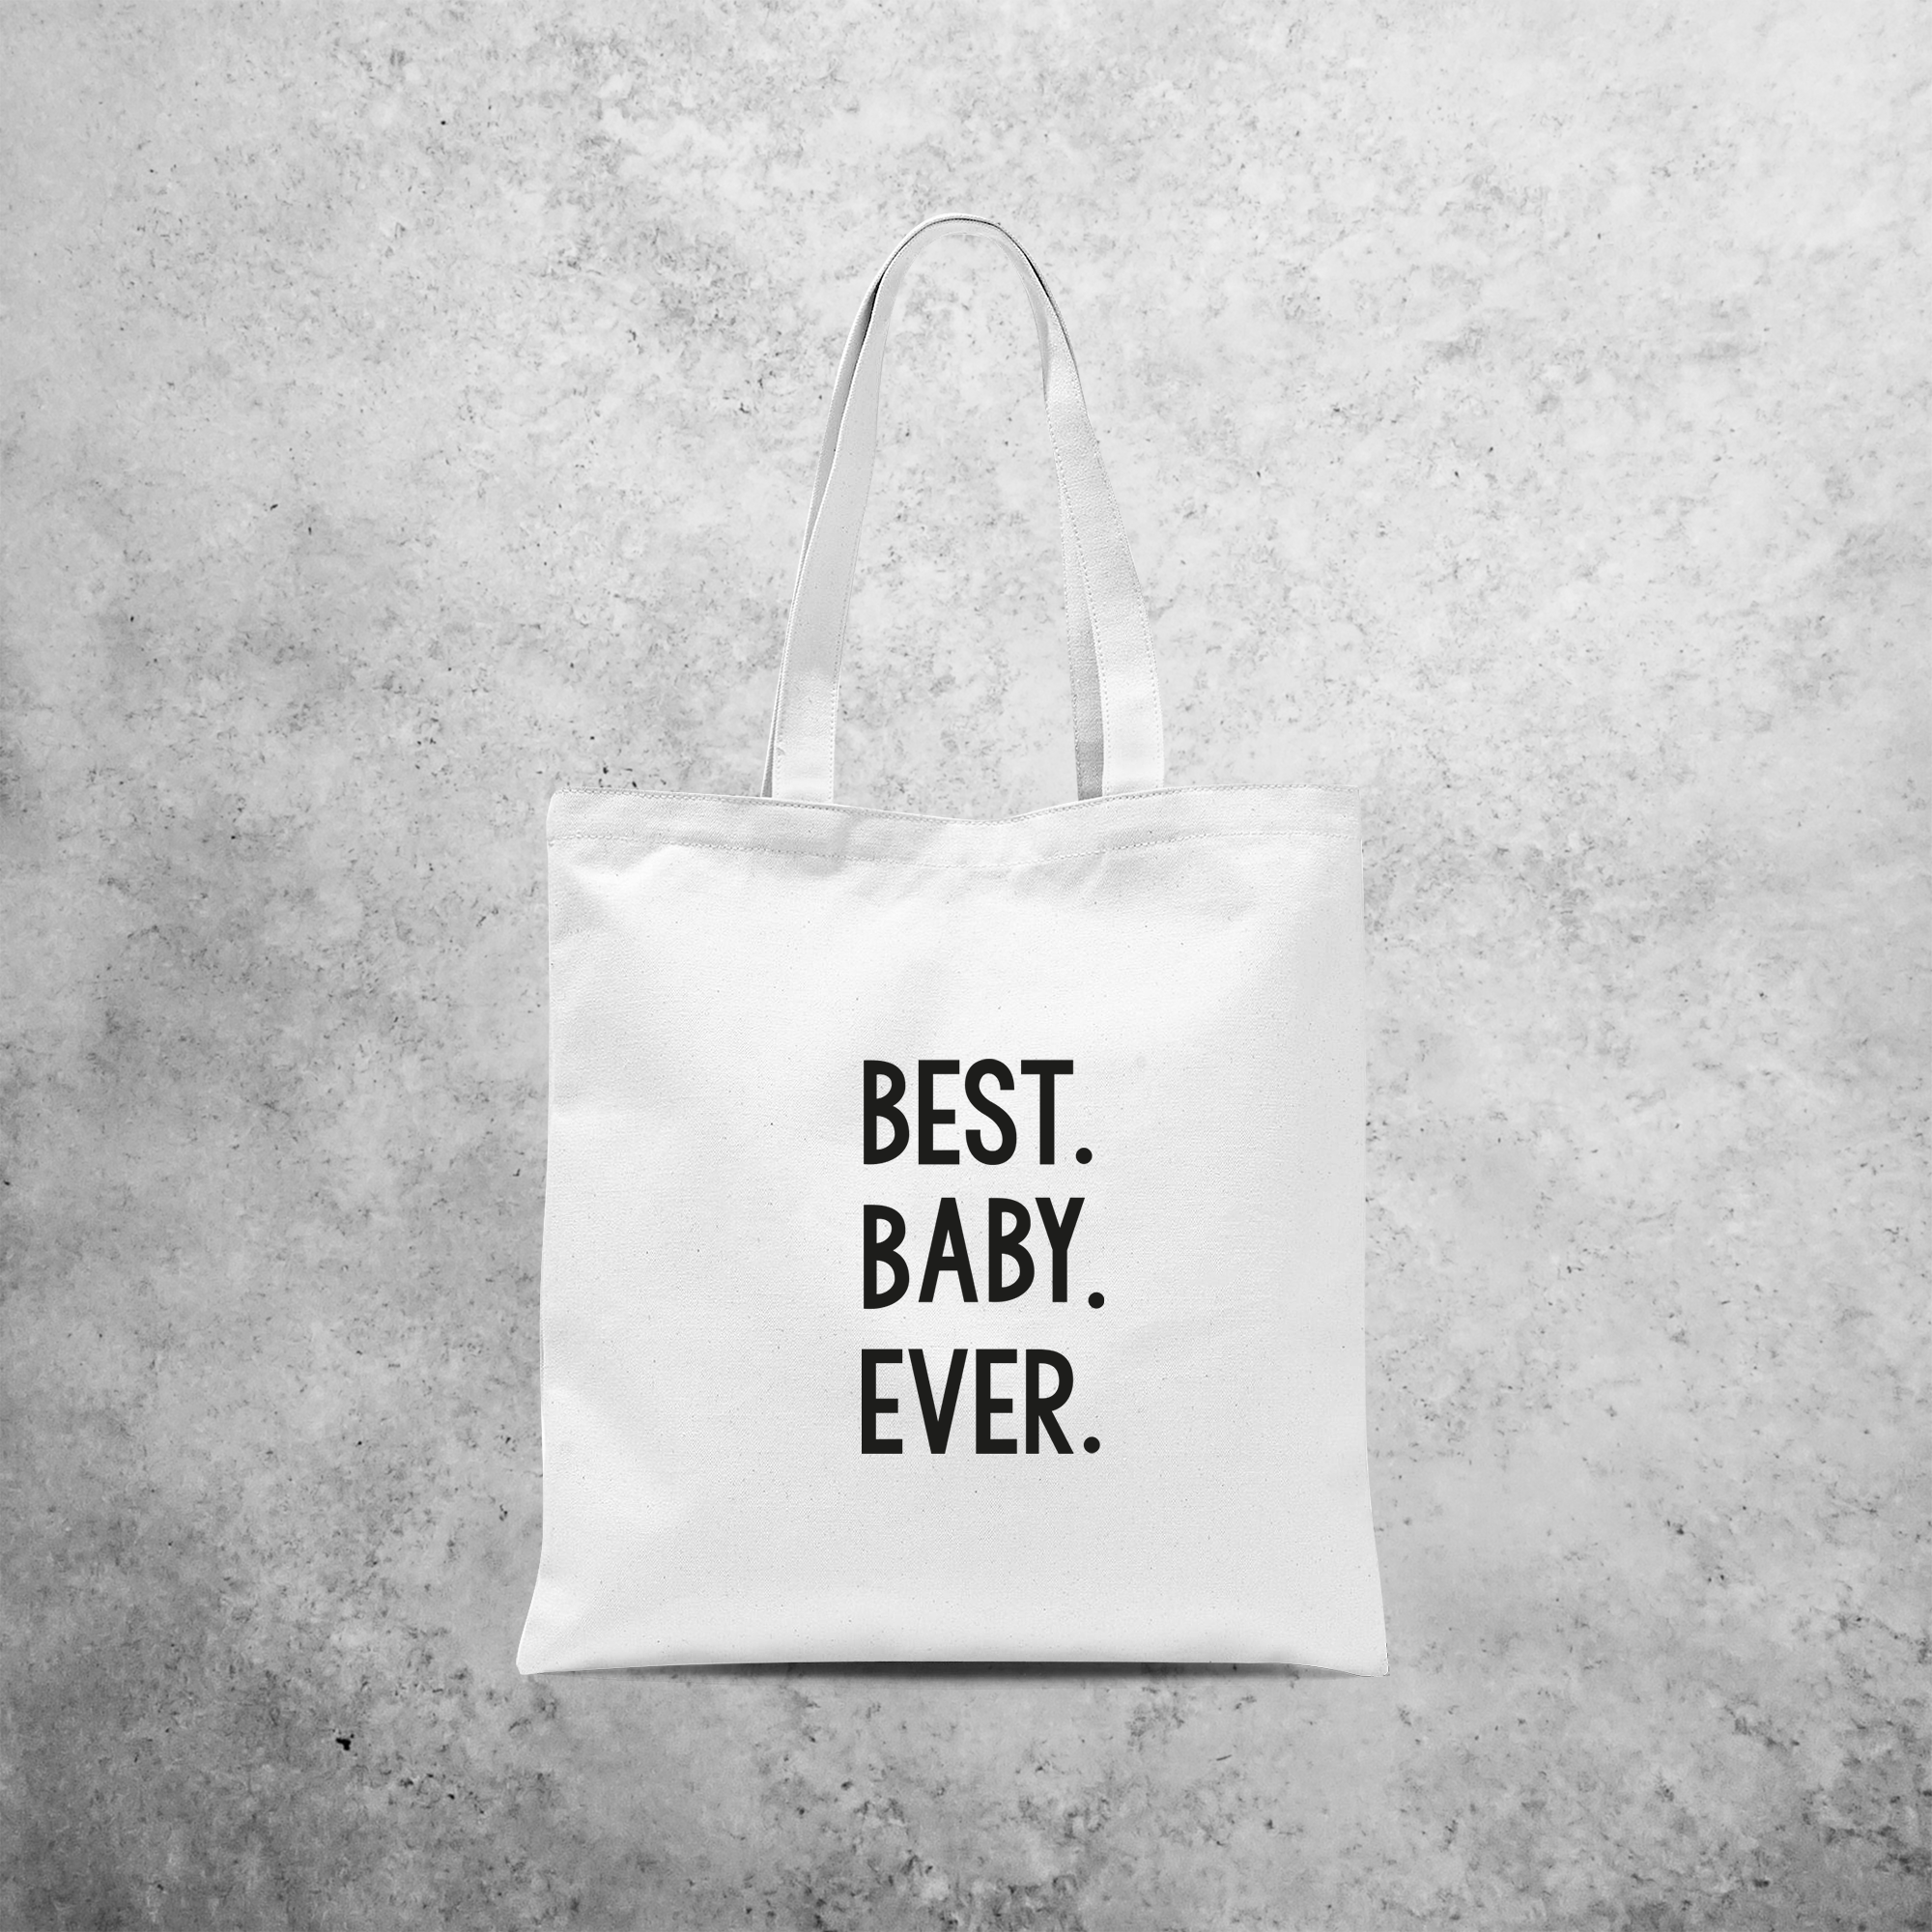 'Best. Baby. Ever.' tote bag